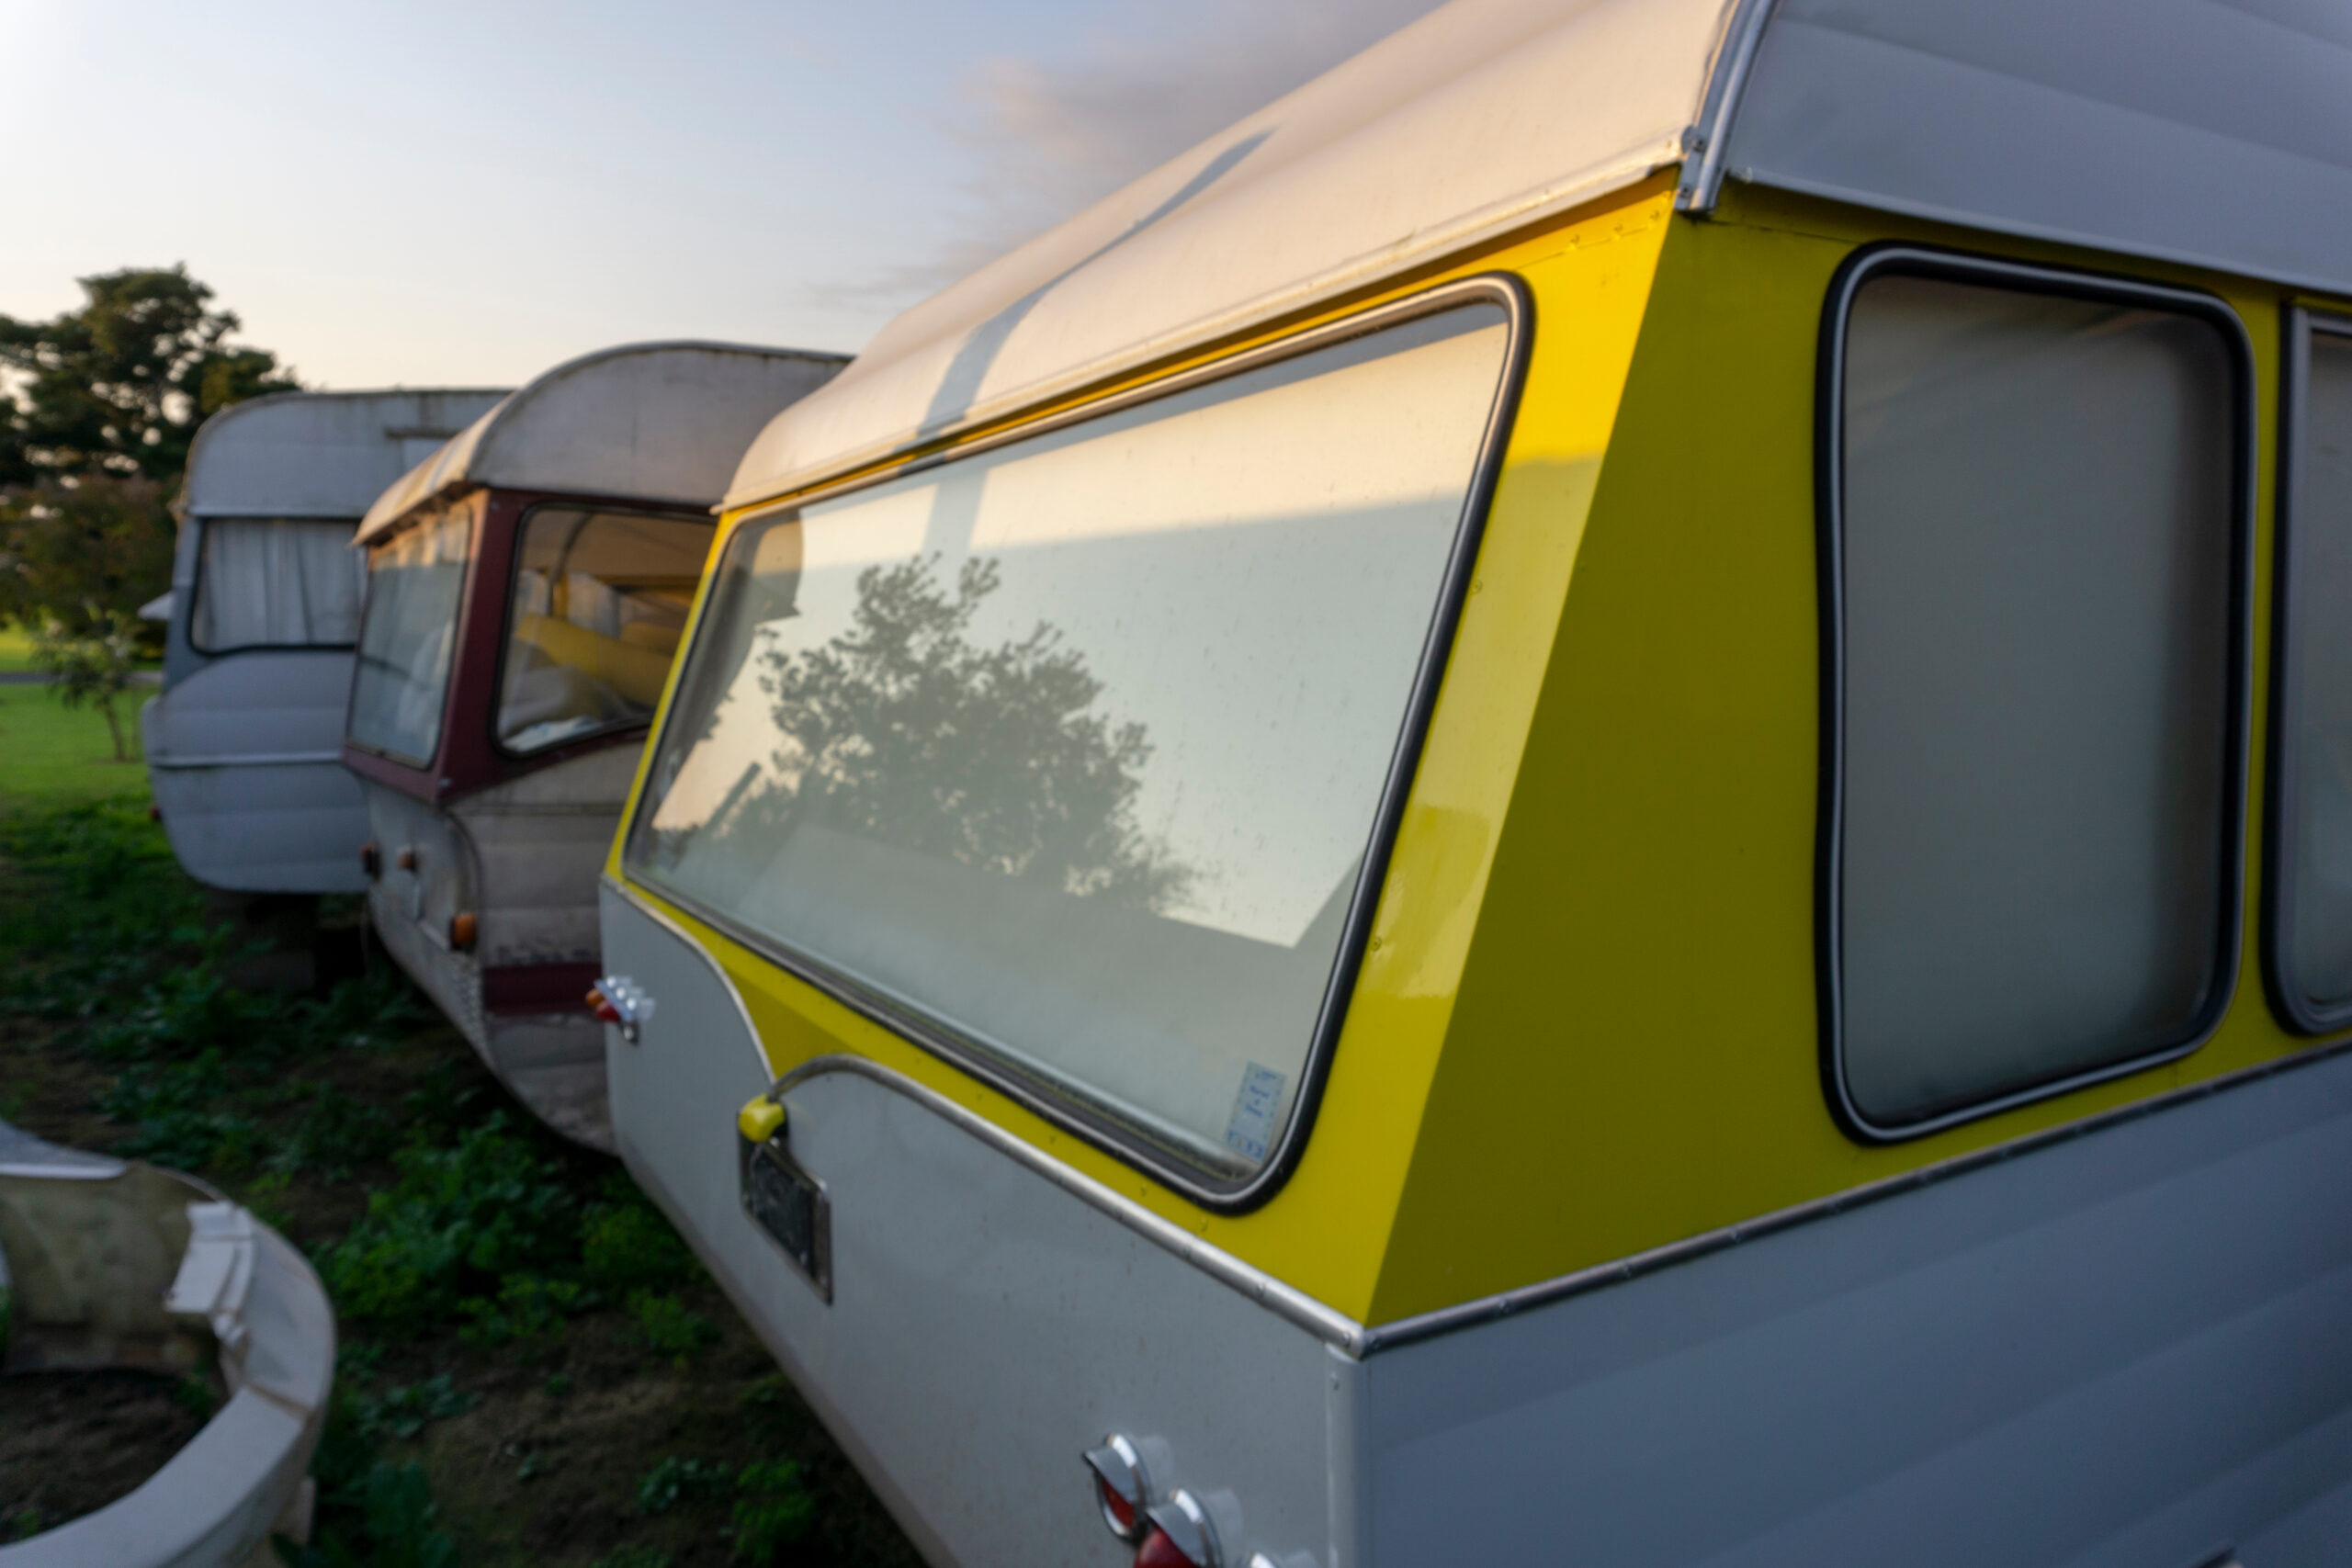 renovated vintage RVs in yard - feature image for Is There Money In Flipping RVs?